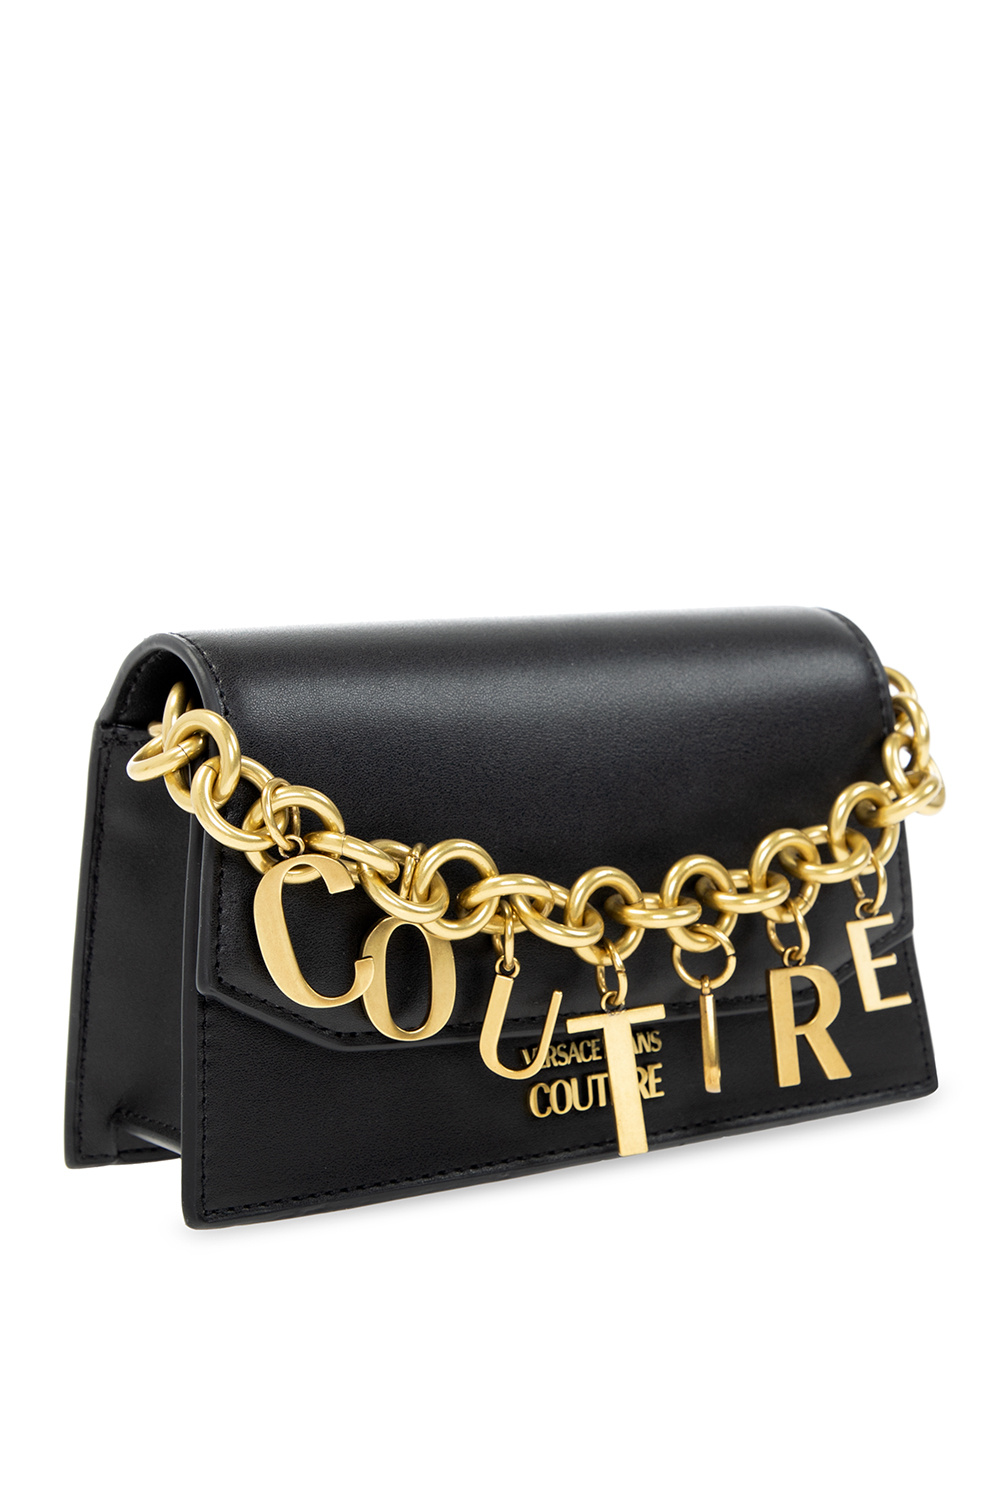 Versace Jeans 'Chain Couture' Tote Bag